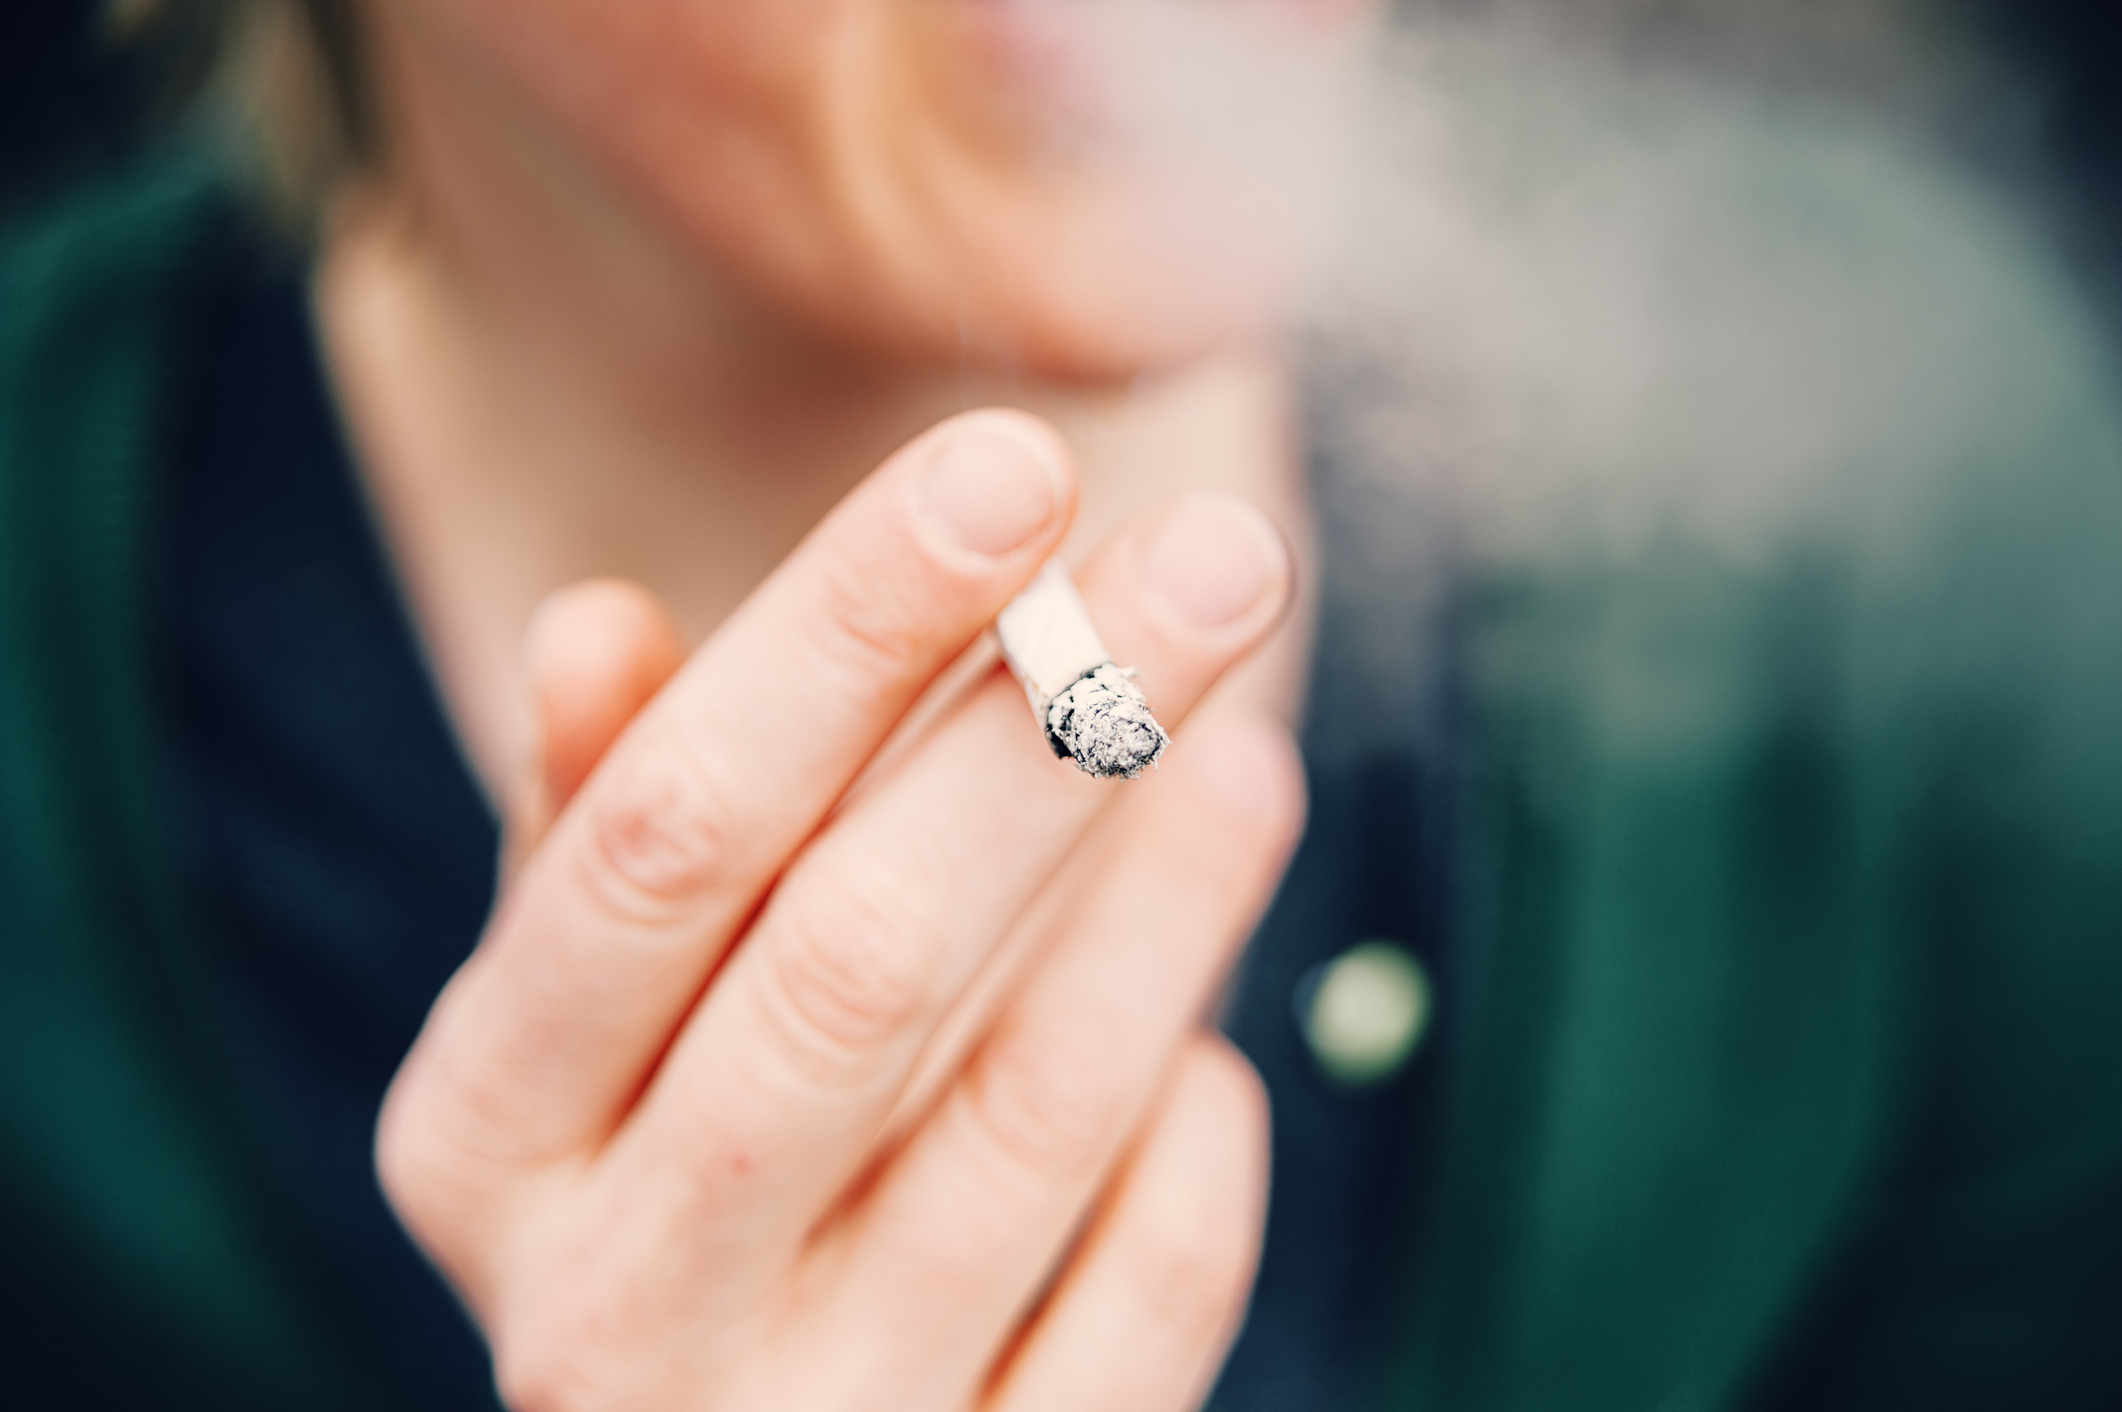 An unidentified person holding a half-smoked cigarette